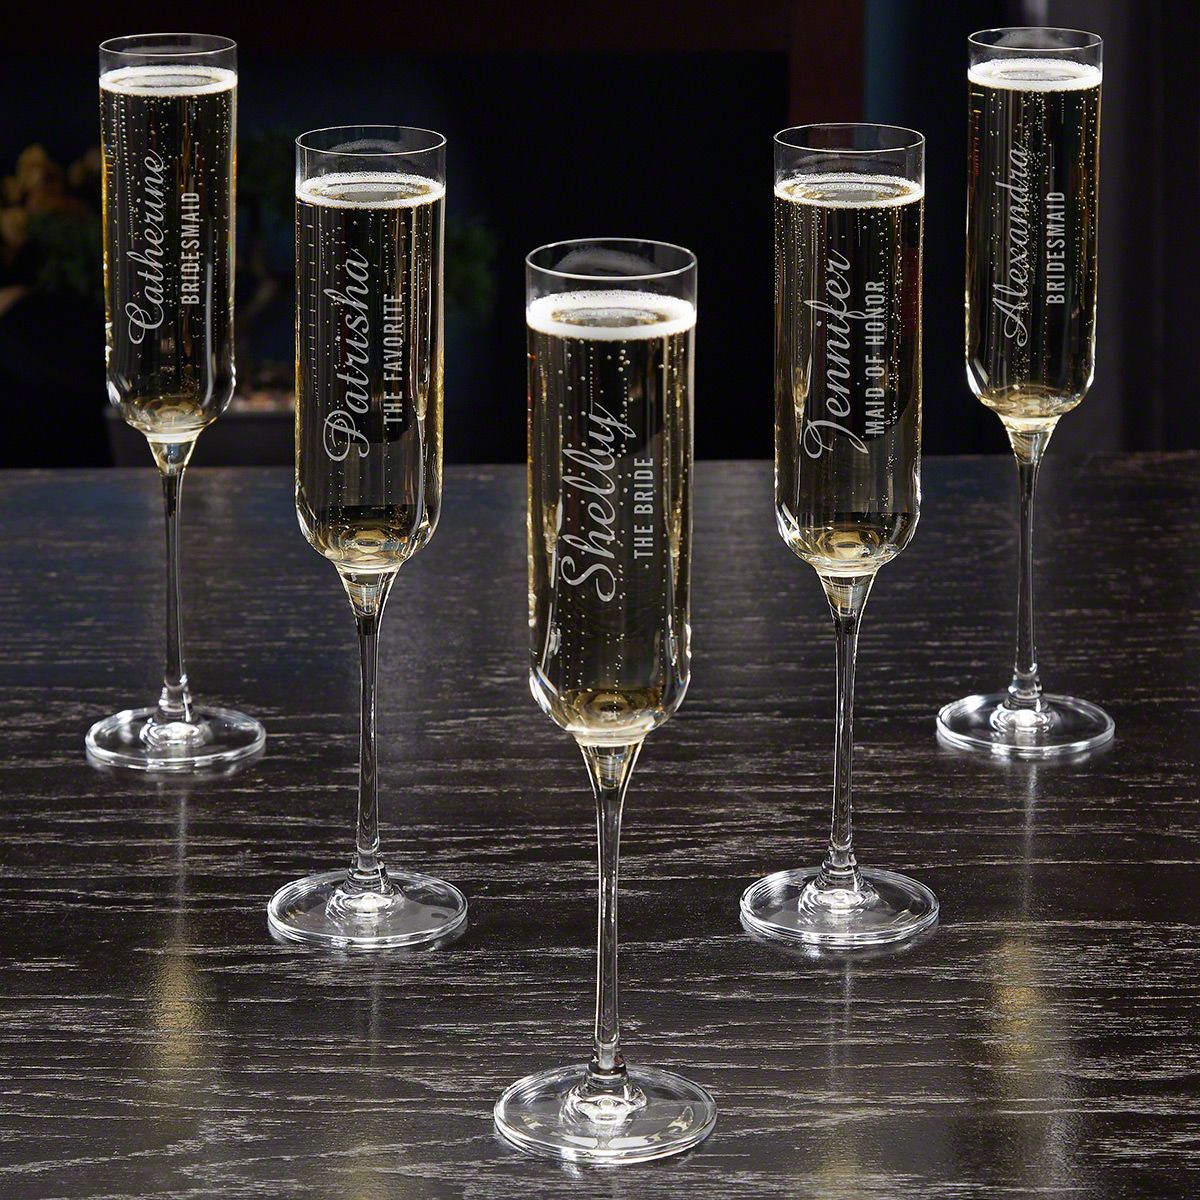 Custom Engraved Champagne Glasses 2 Bridesmaids Toasting Flutes Customized Wedding Gifts for Bride and Groom Personalized Champagne Flutes